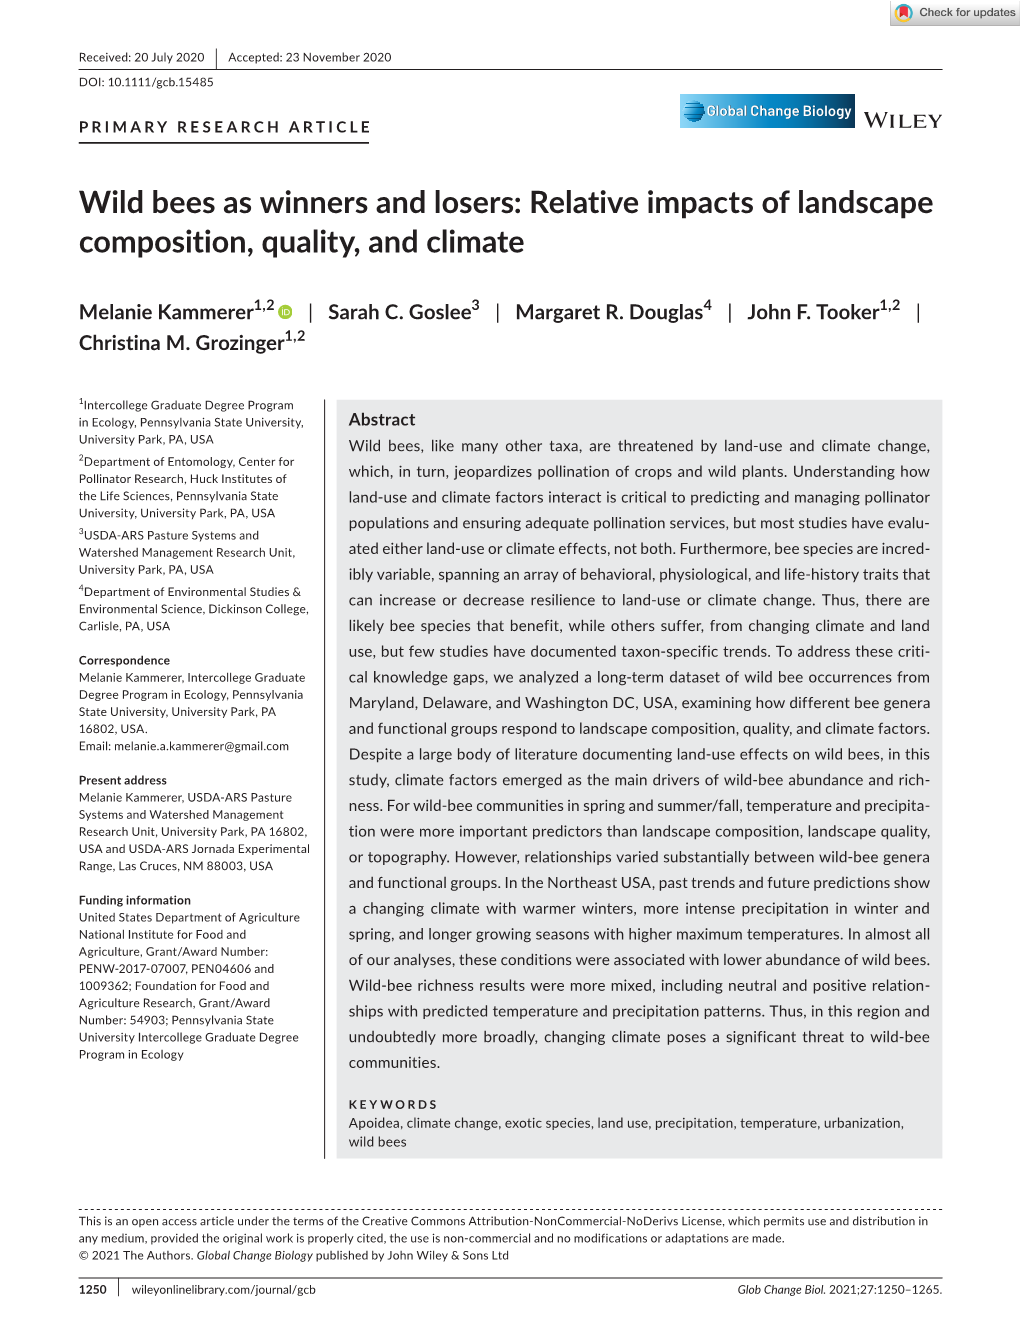 Wild Bees As Winners and Losers: Relative Impacts of Landscape Composition, Quality, and Climate